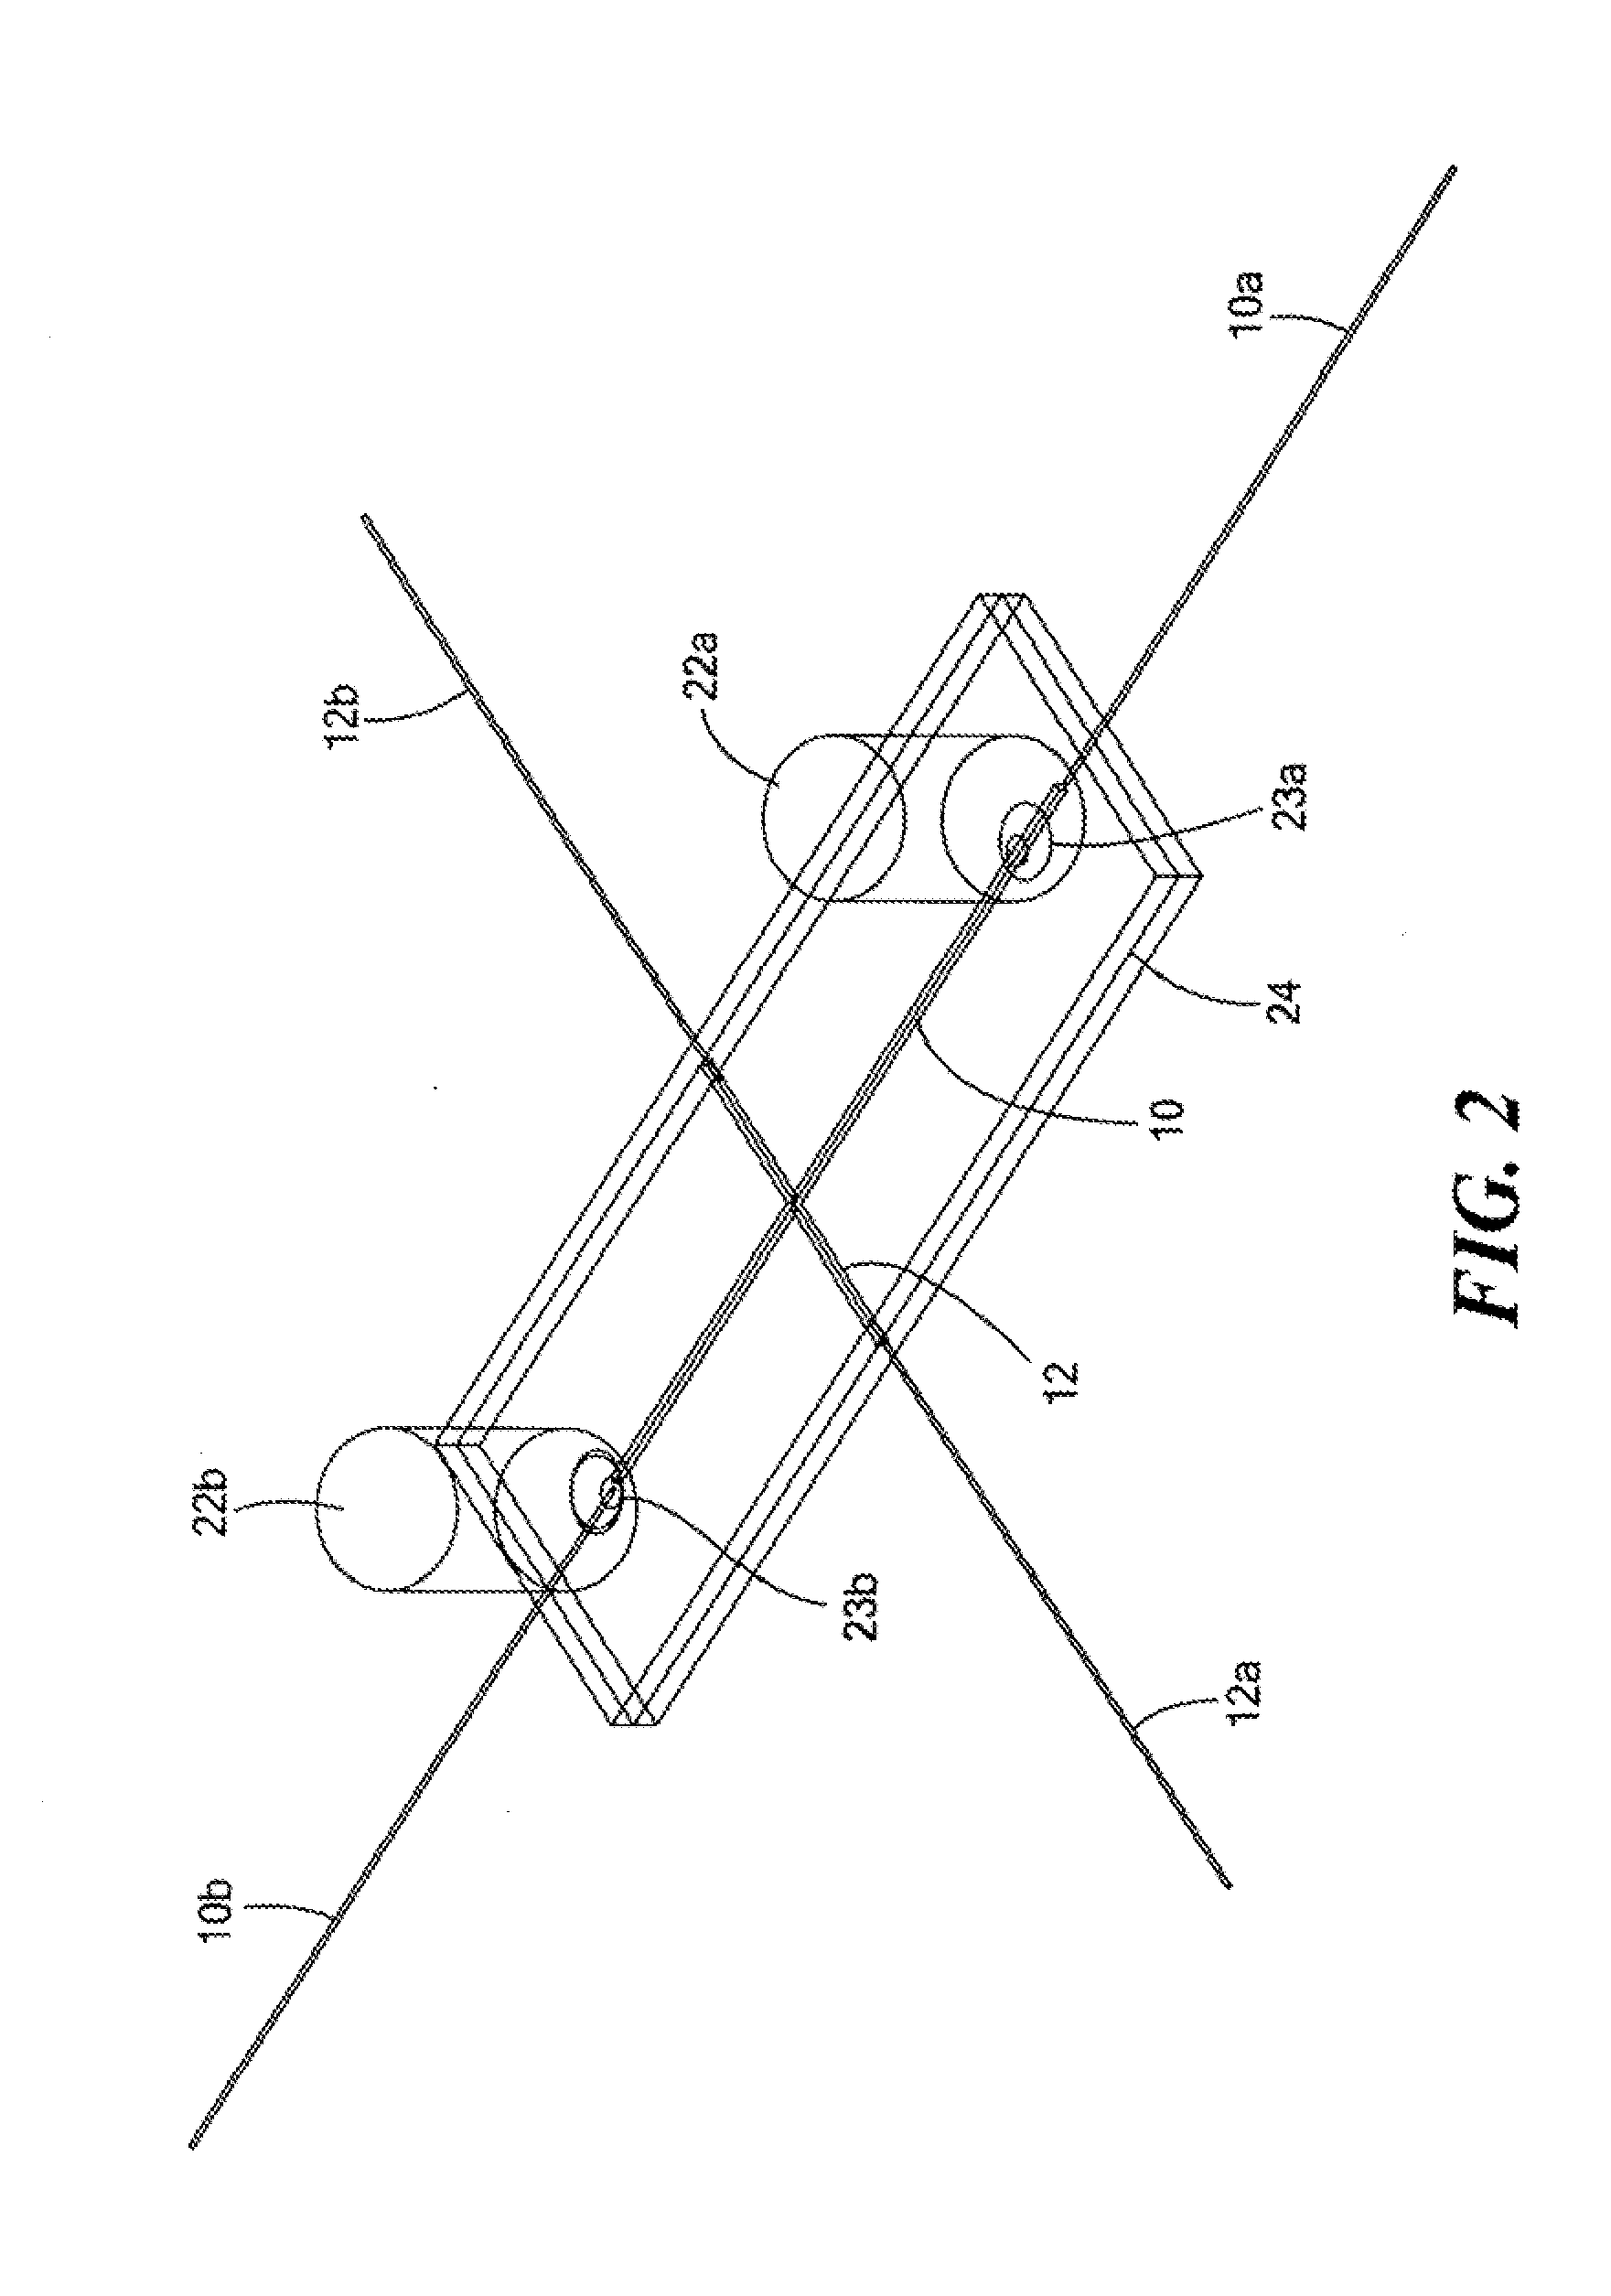 Method and apparatus for precise seletion and extraction of a focused component in isoelectric focusing performed in micro-channels